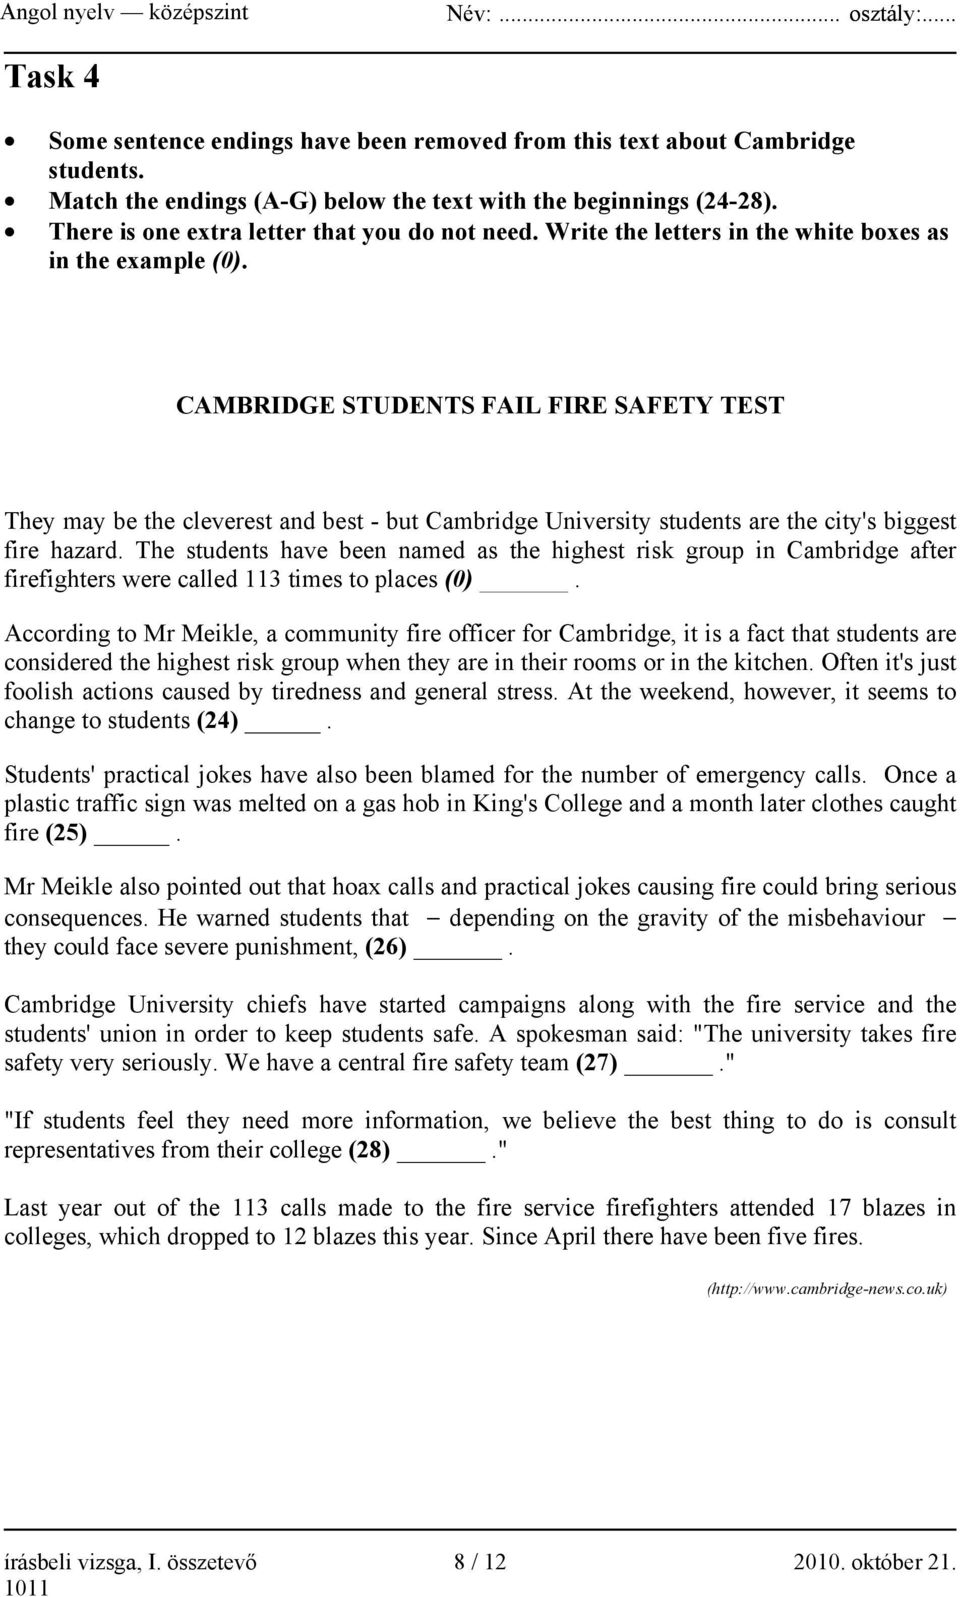 CAMBRIDGE STUDENTS FAIL FIRE SAFETY TEST They may be the cleverest and best - but Cambridge University students are the city's biggest fire hazard.